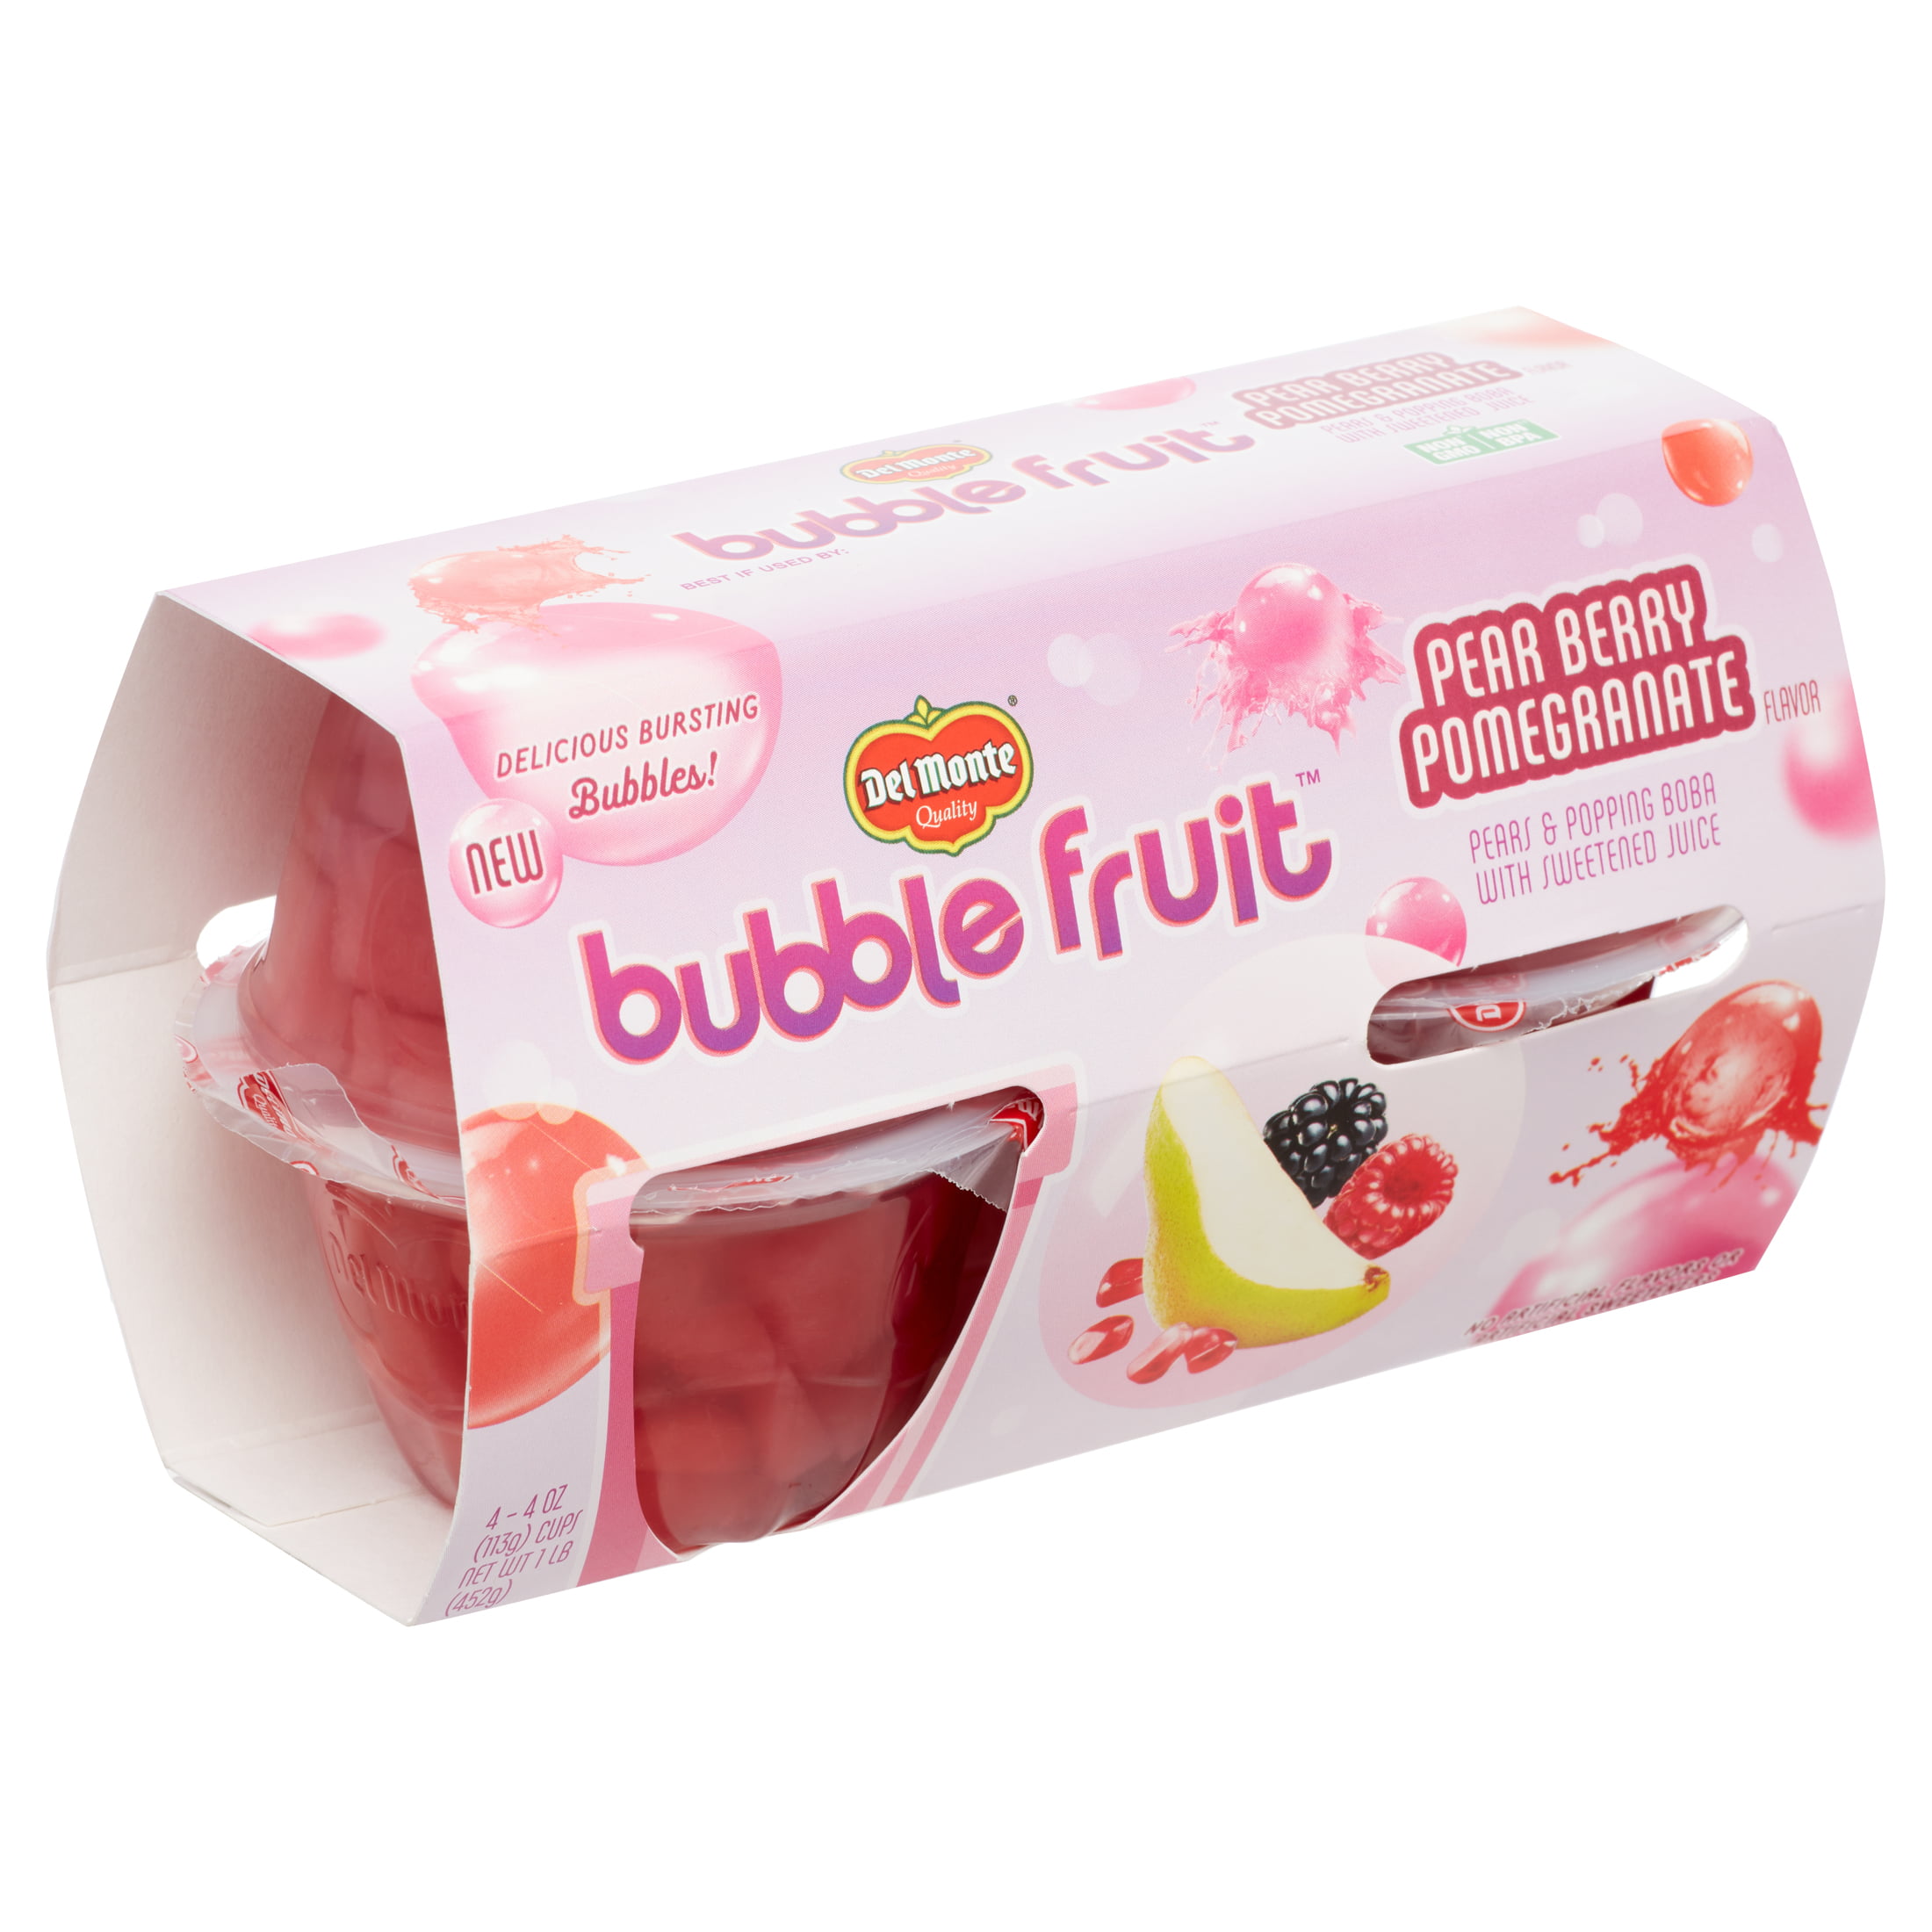 Del Monte Bubble Fruit Pear Berry Pomegrantae Pears & Popping Boba in  Sweetened Juice Cups 4 Count, 16 oz - Ralphs